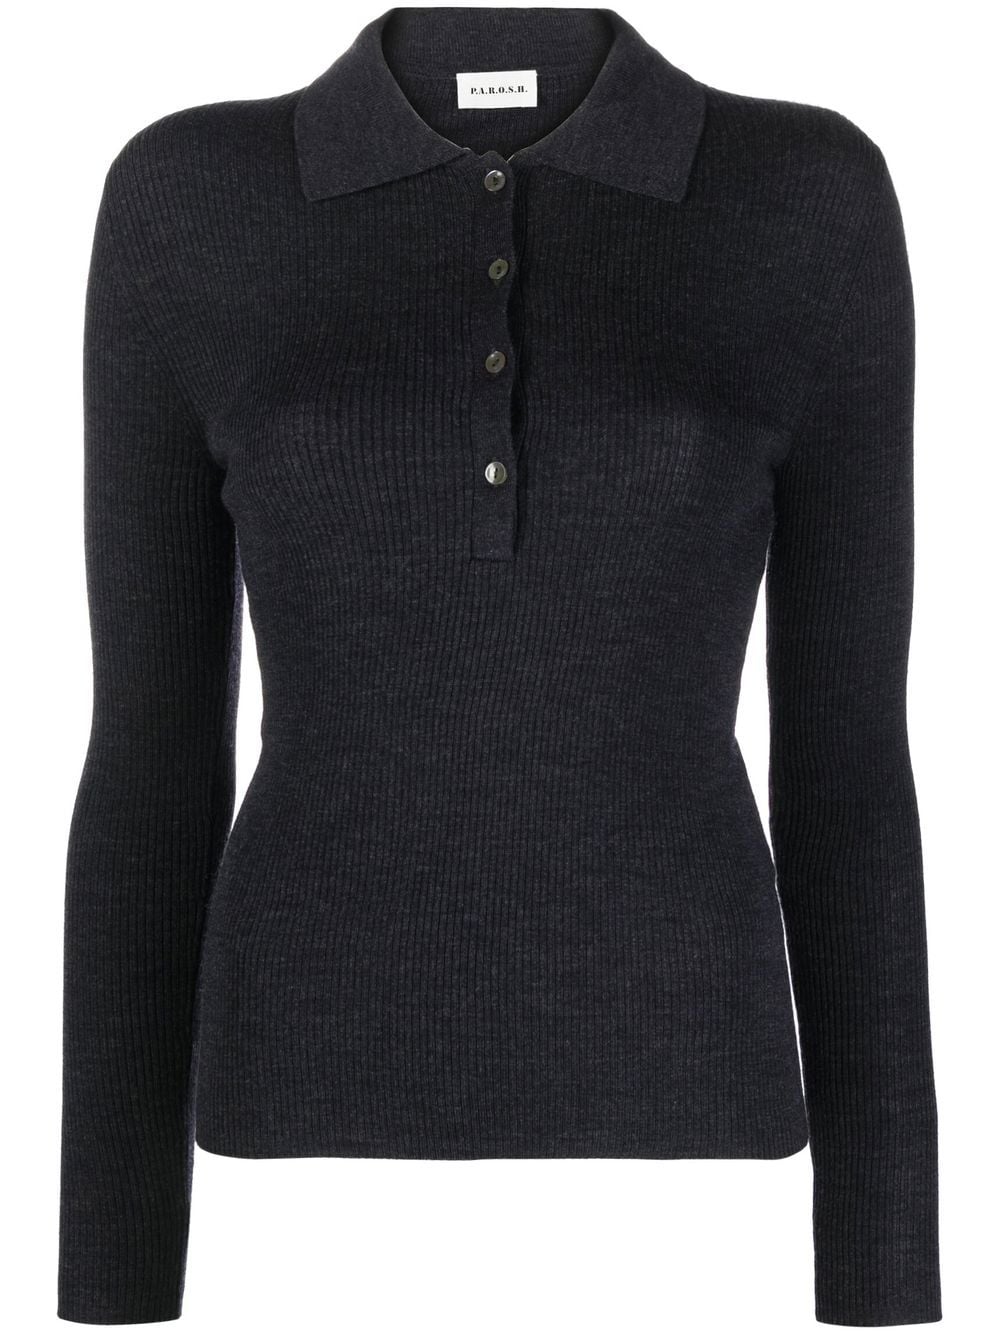 P.A.R.O.S.H. polo-collar Knitted Top - Farfetch